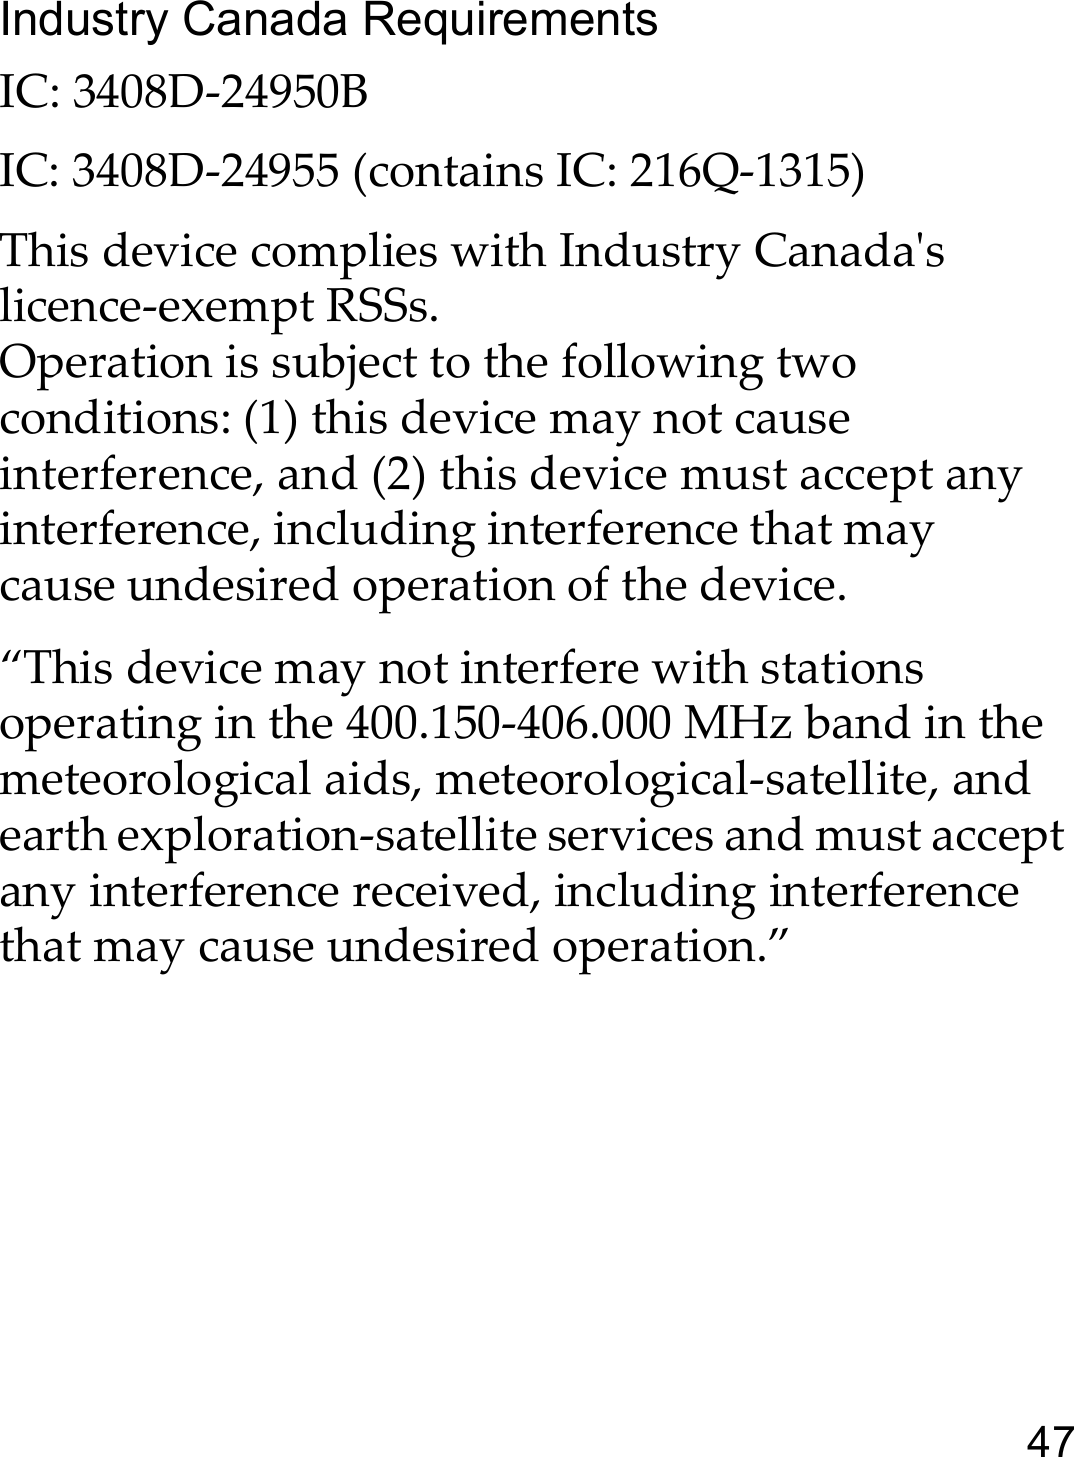 47Industry Canada RequirementsIC: 3408D-24950B IC: 3408D-24955 (contains IC: 216Q-1315) This device complies with Industry Canada&apos;s licence-exempt RSSs.Operation is subject to the following two conditions: (1) this device may not cause interference, and (2) this device must accept any interference, including interference that may cause undesired operation of the device.“This device may not interfere with stations operating in the 400.150-406.000 MHz band in the meteorological aids, meteorological-satellite, and earth exploration-satellite services and must accept any interference received, including interference that may cause undesired operation.”